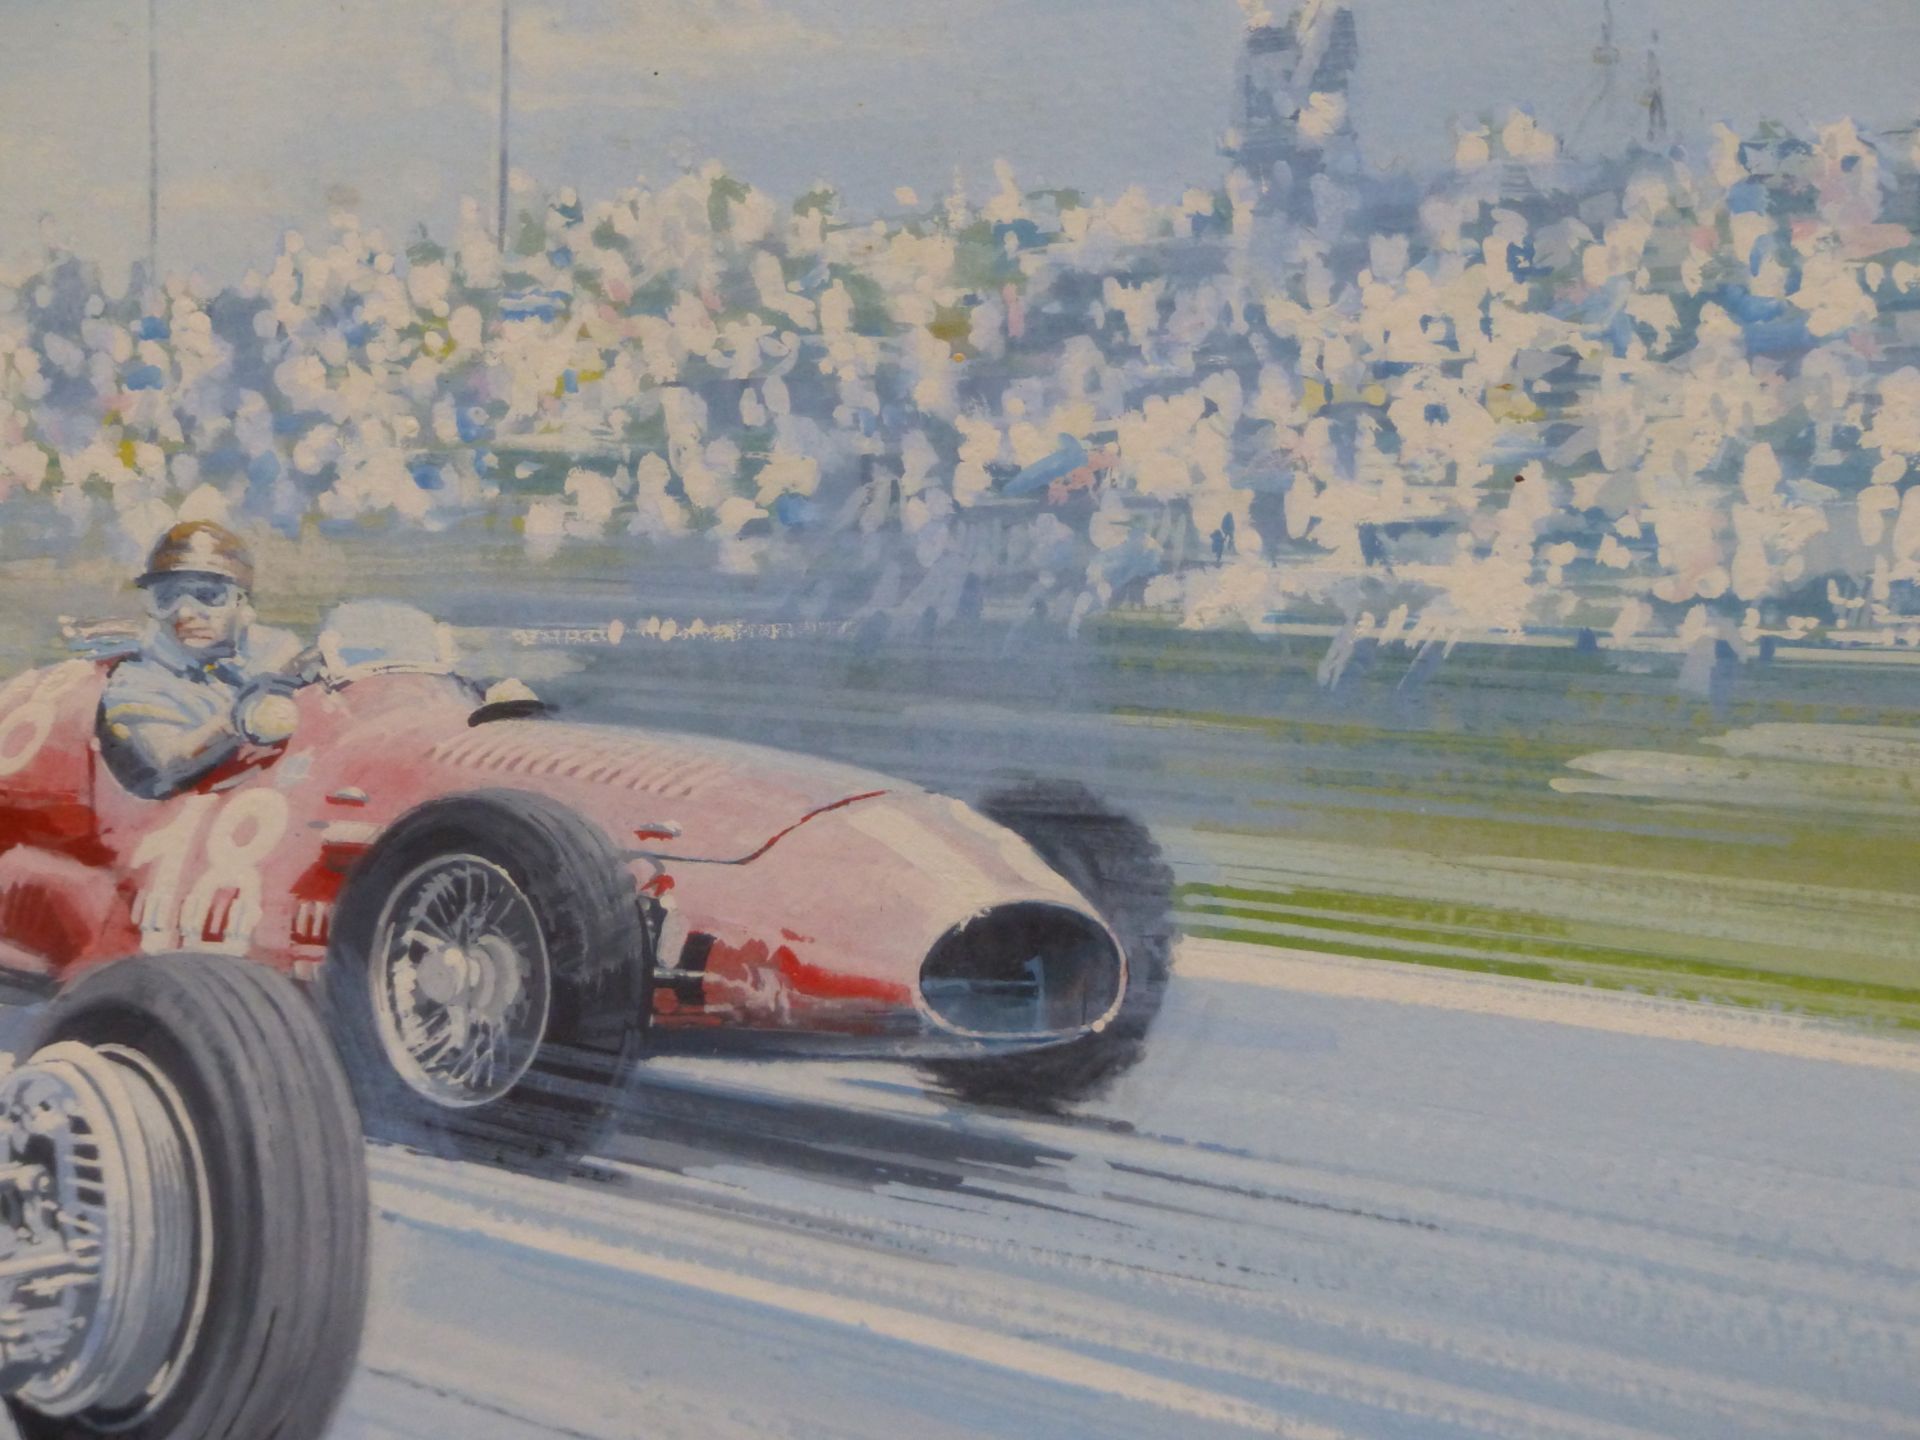 RODNEY DIGGENS (B 1937), ARR. THE 1953 FRENCH GRAND PRIX MIKE HAWTHORN IN A FERRARI LEADING FANGIO - Image 6 of 10